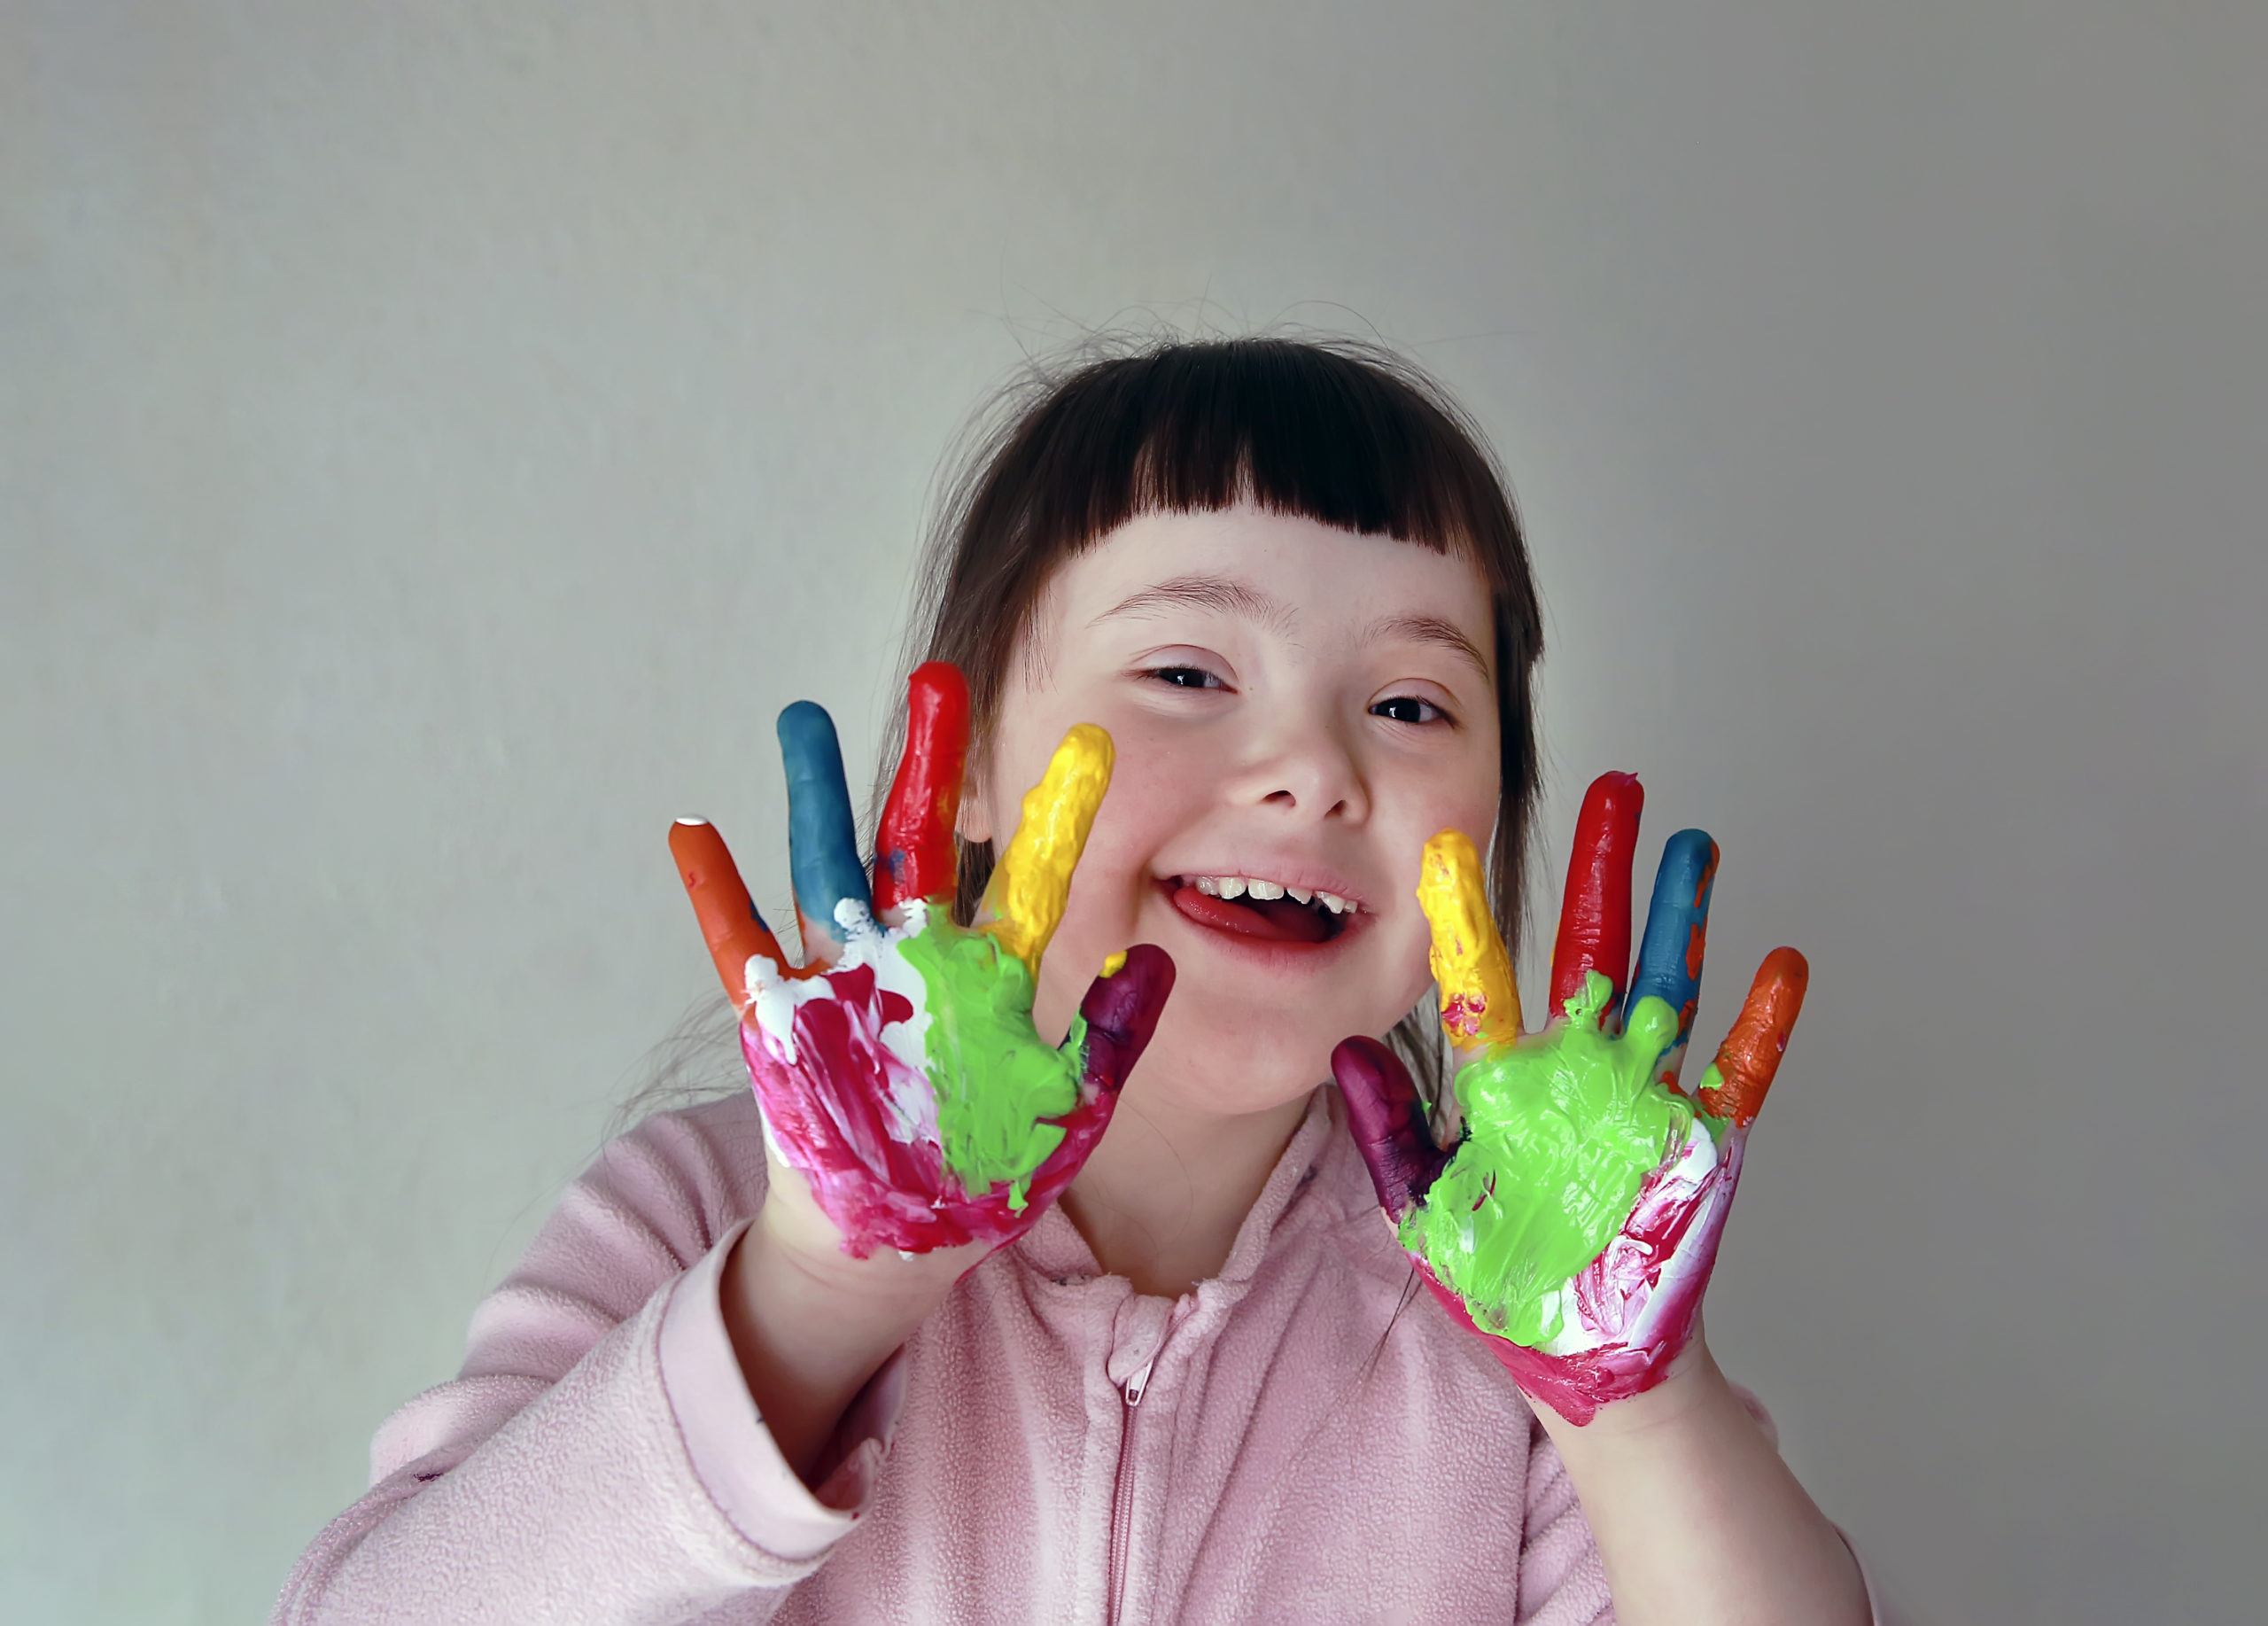 Little girl with painted hands. Isolated on grey background.